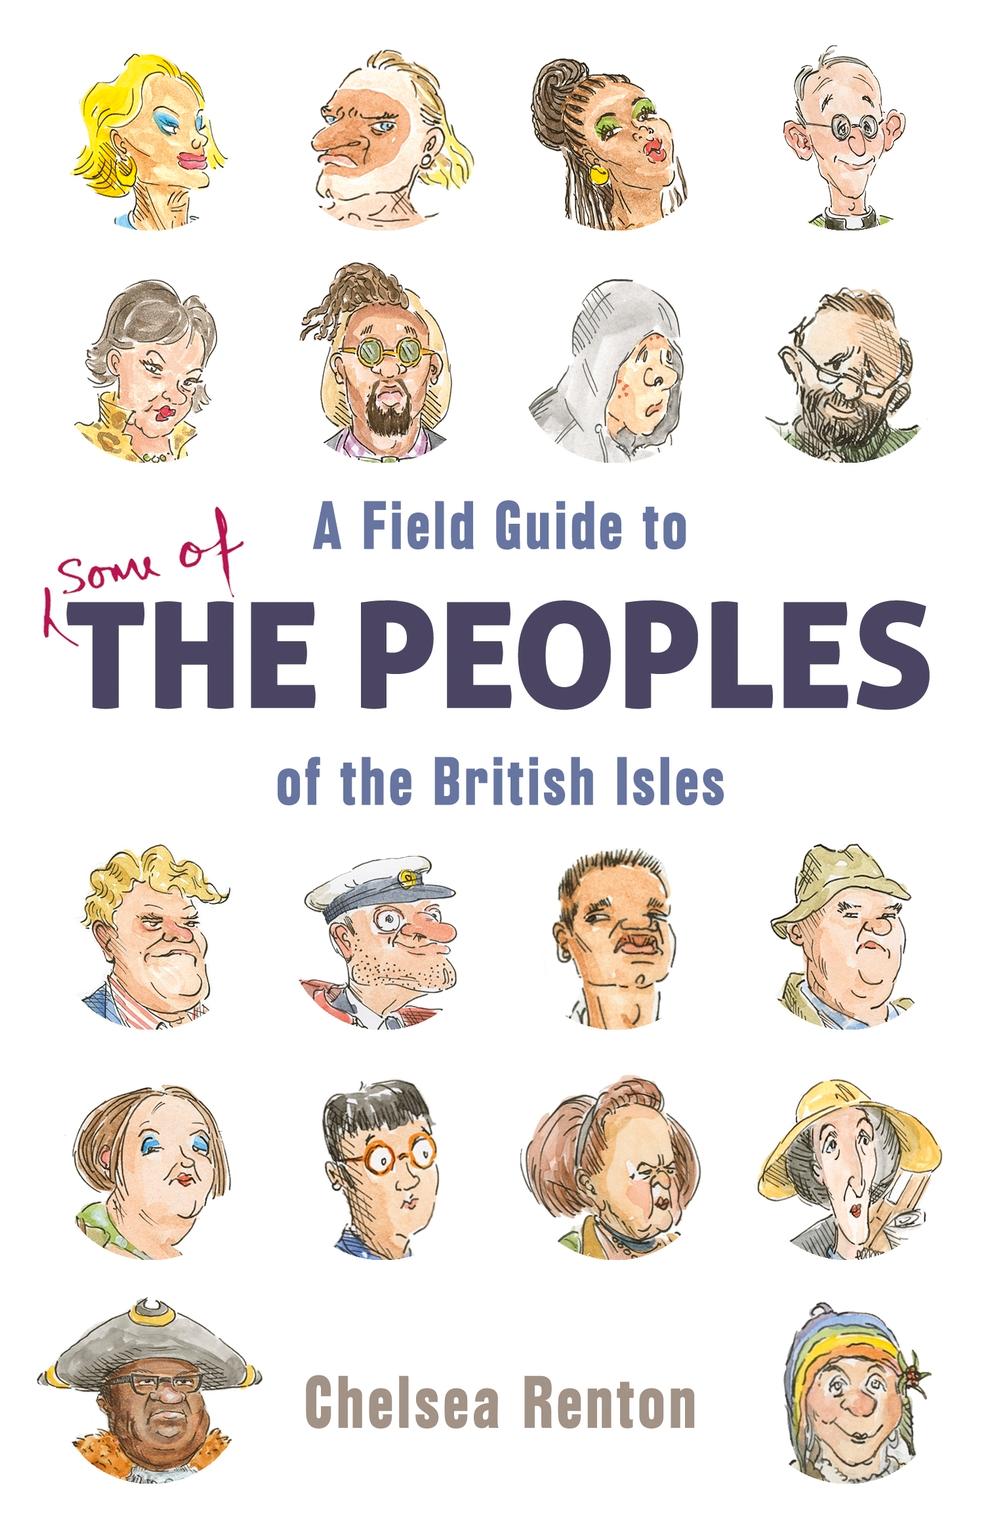 Field Guide to the Peoples of the British Isles - Chelsea Renton